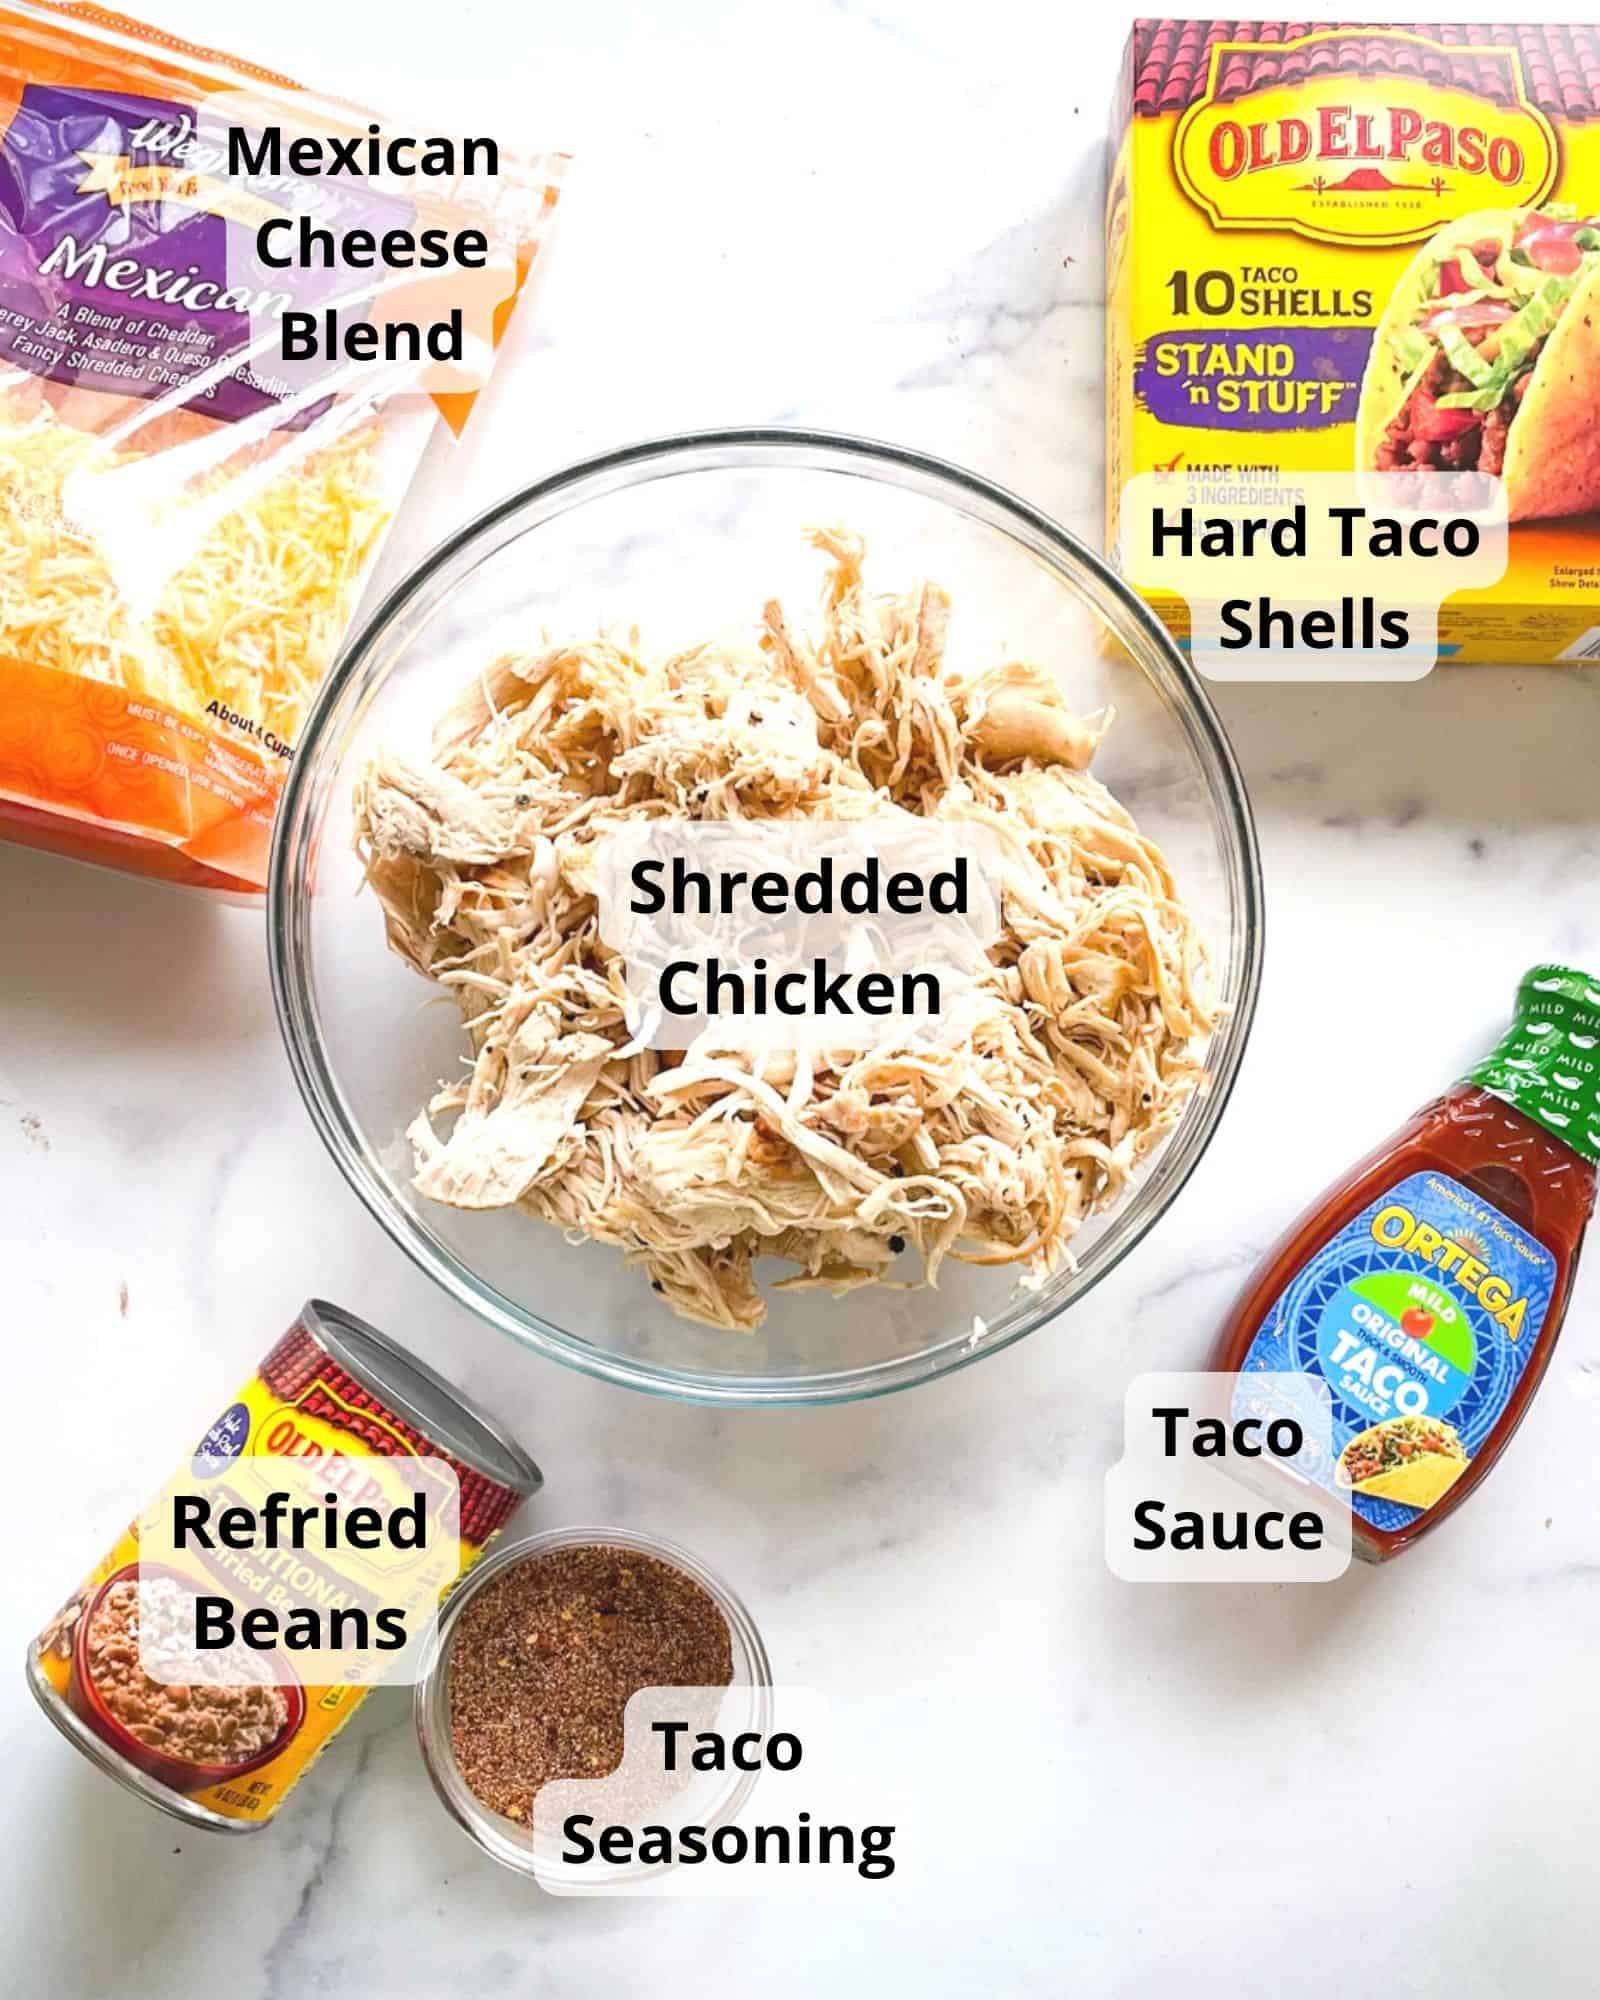 ingredients to make chicken tacos - shredded chicken, taco sauce, mexican cheese blend, refried beans, hard taco shells, and taco seasoning.